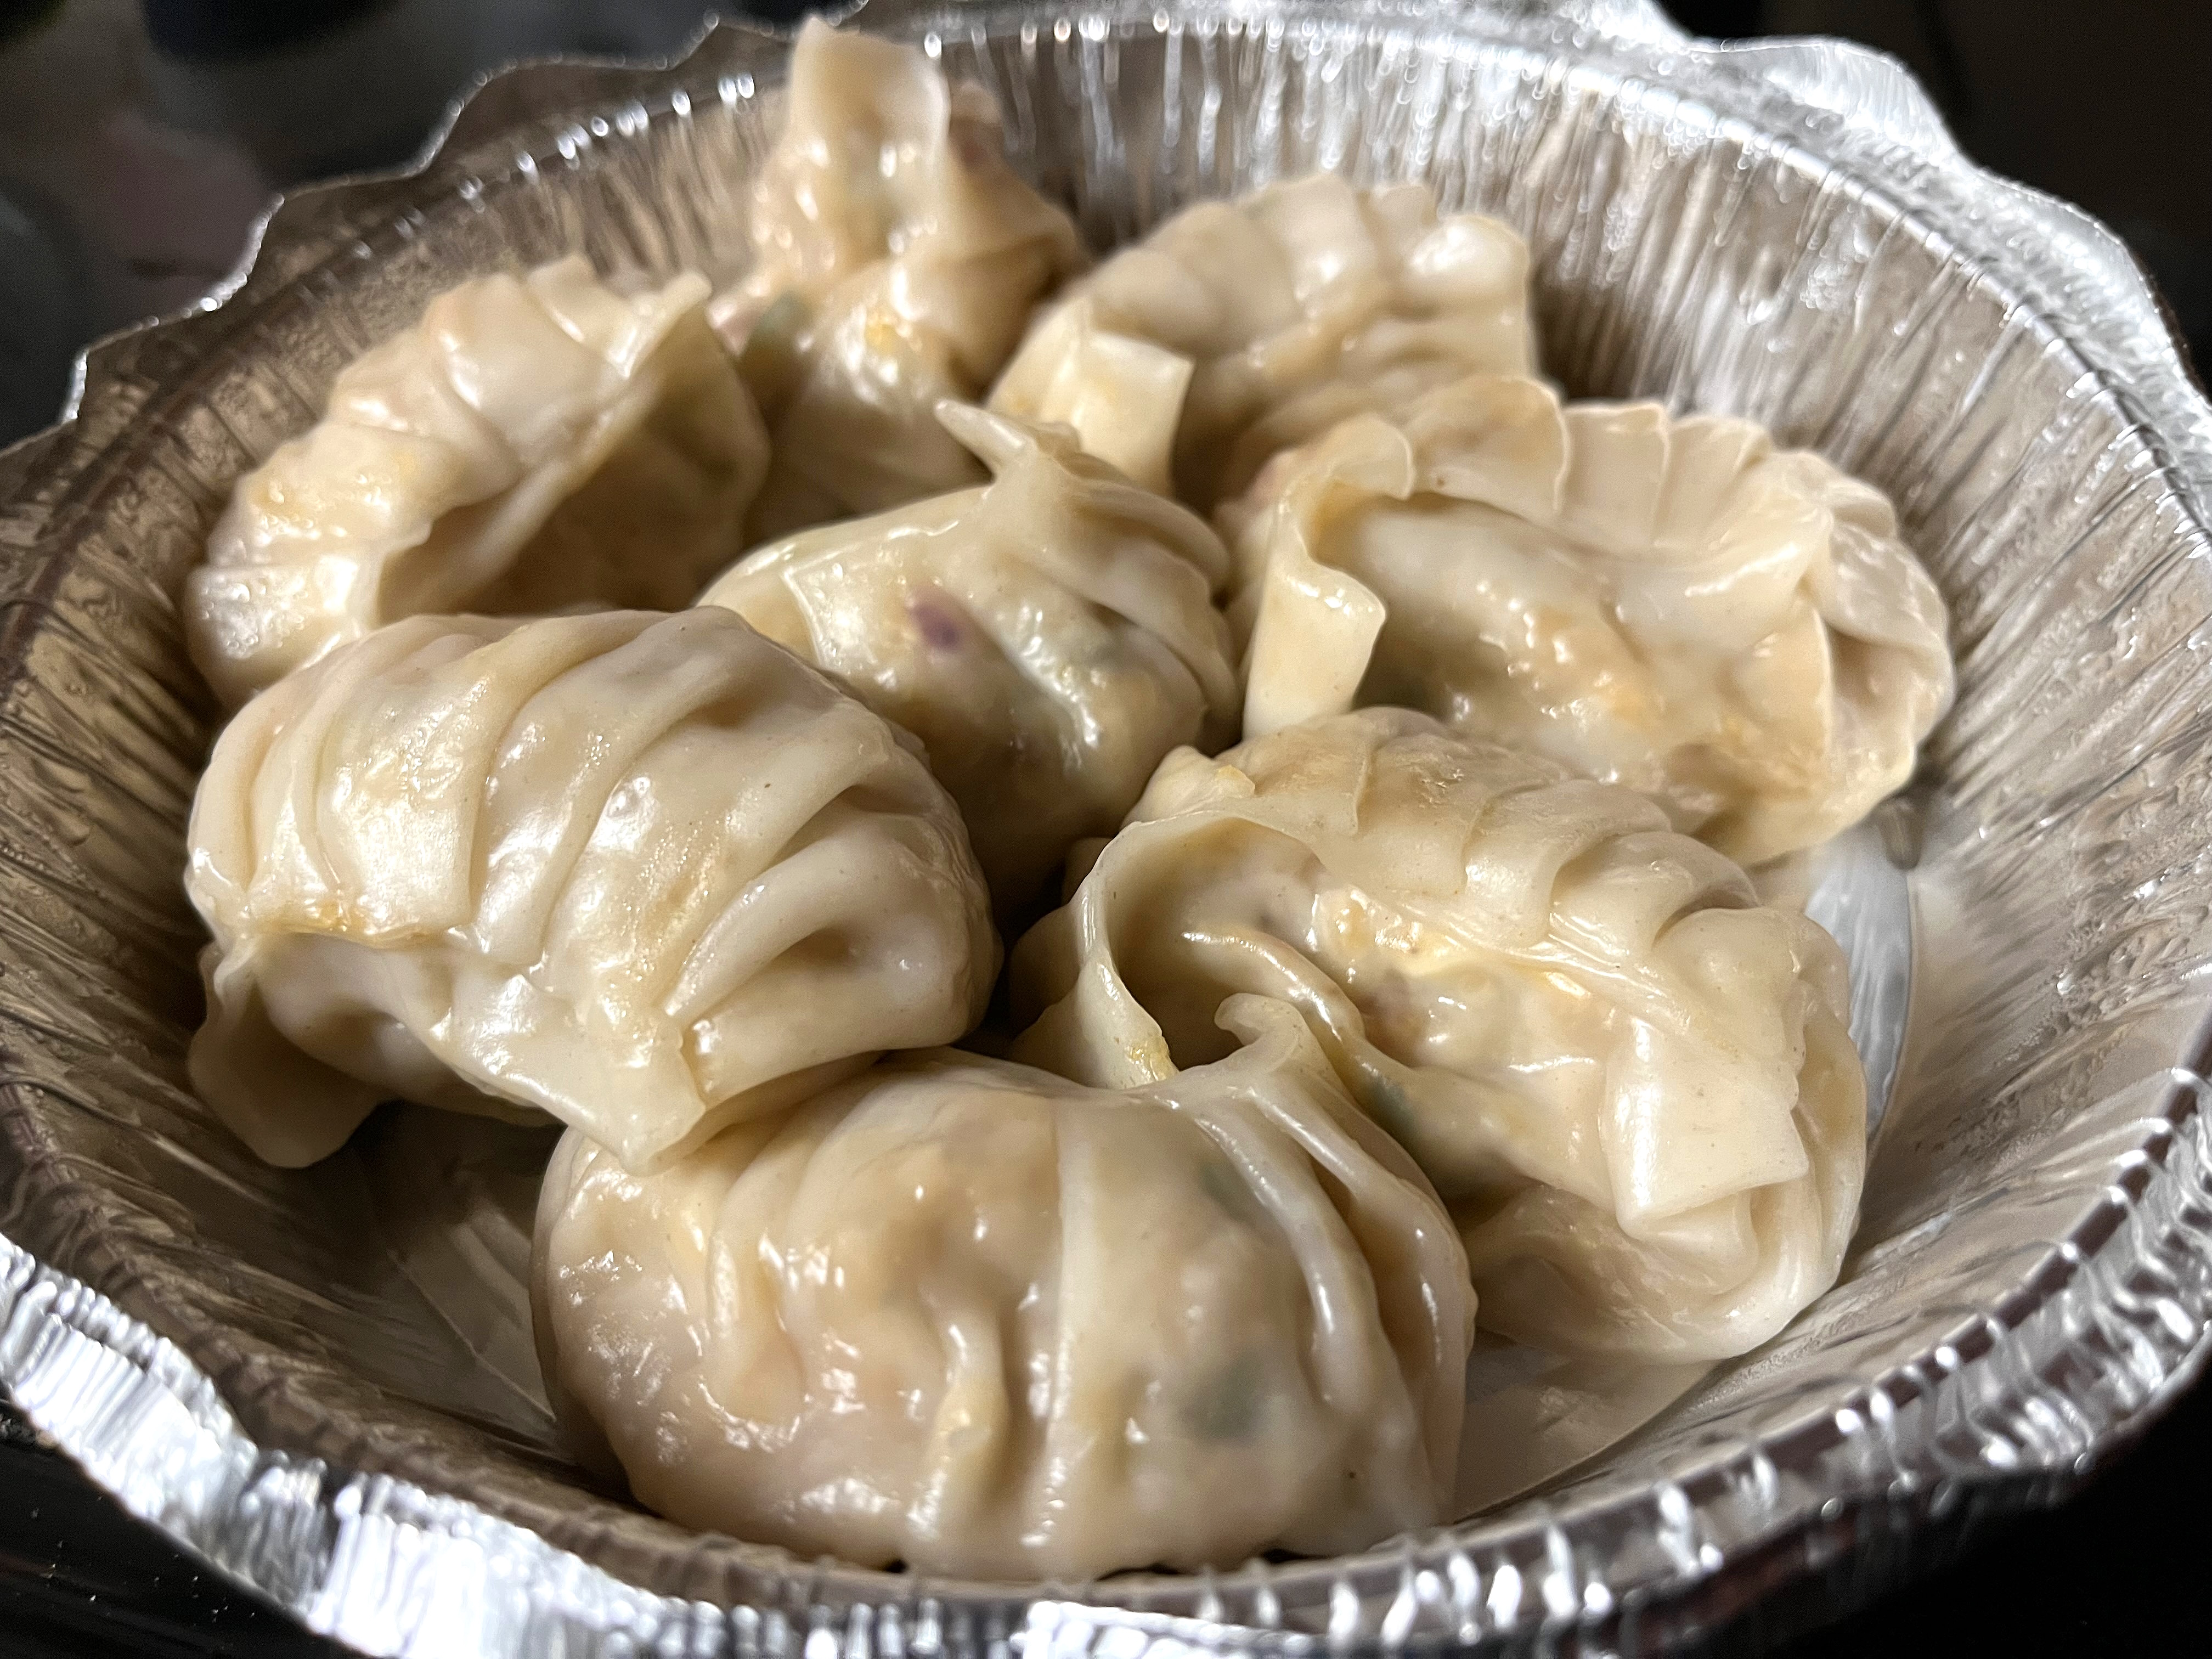 PHOTOS: Hearty dumplings galore at Worcester's Momo Palace